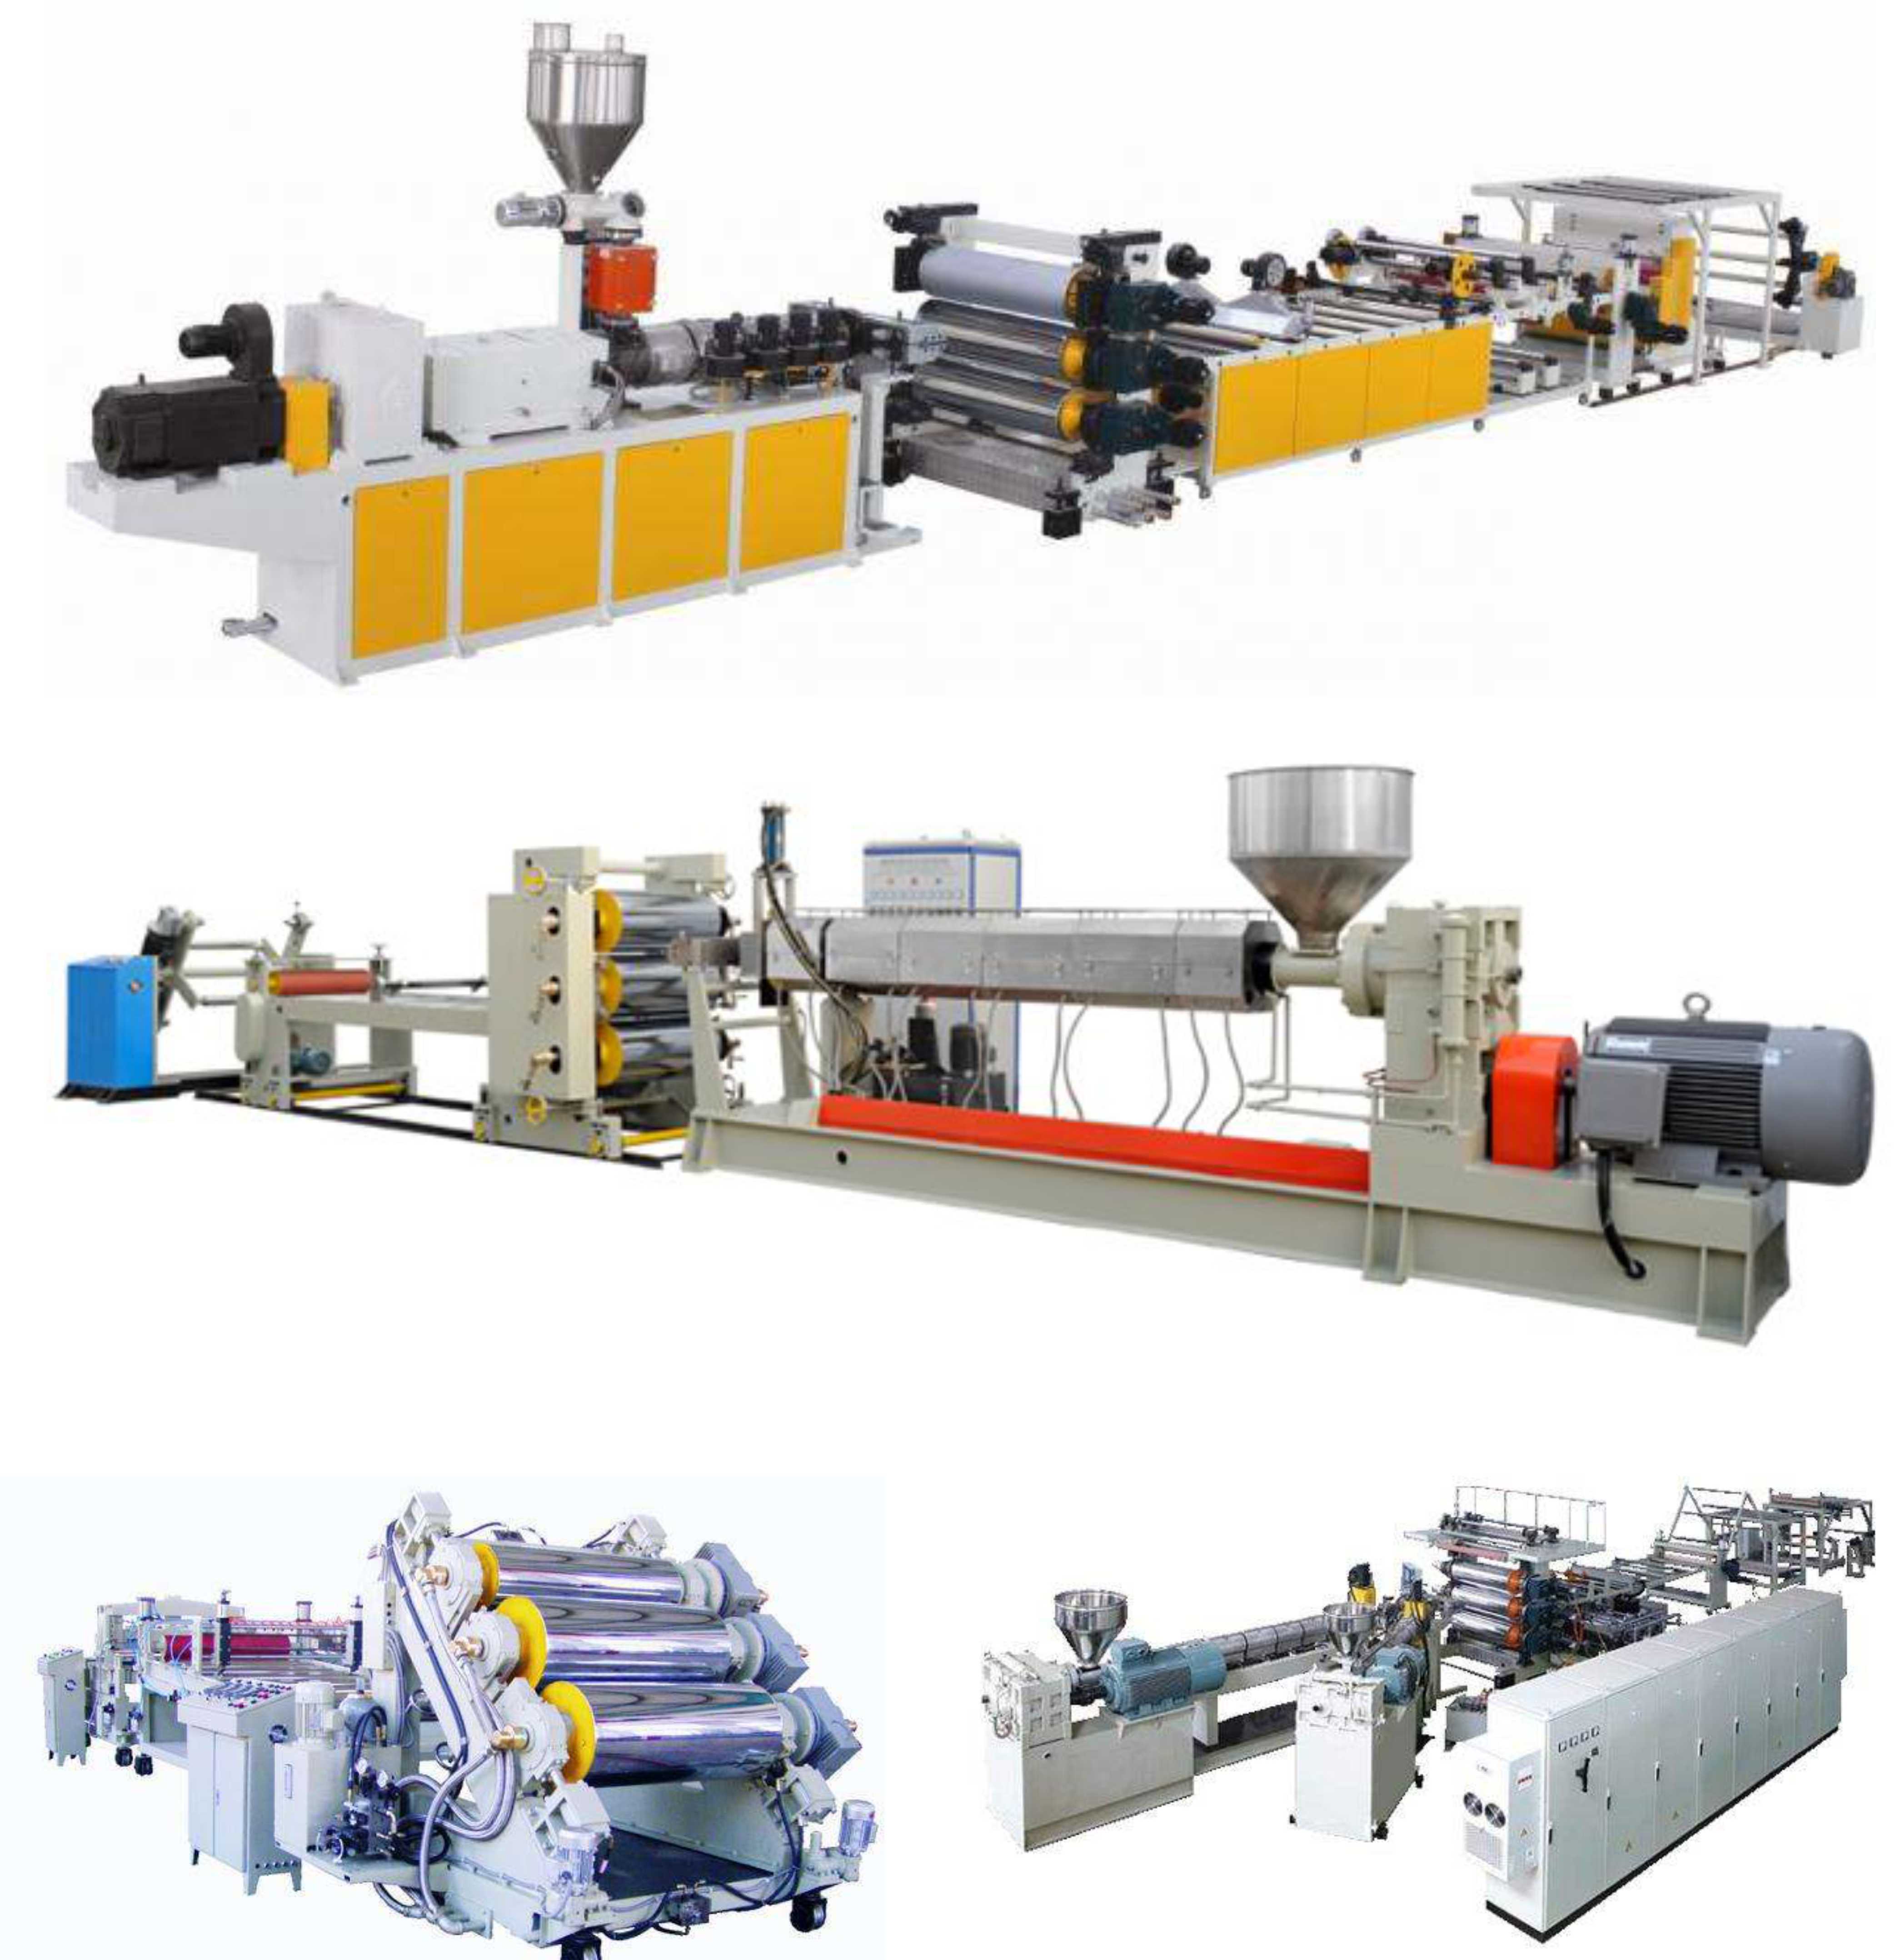 Changfeng Roller manufacturing